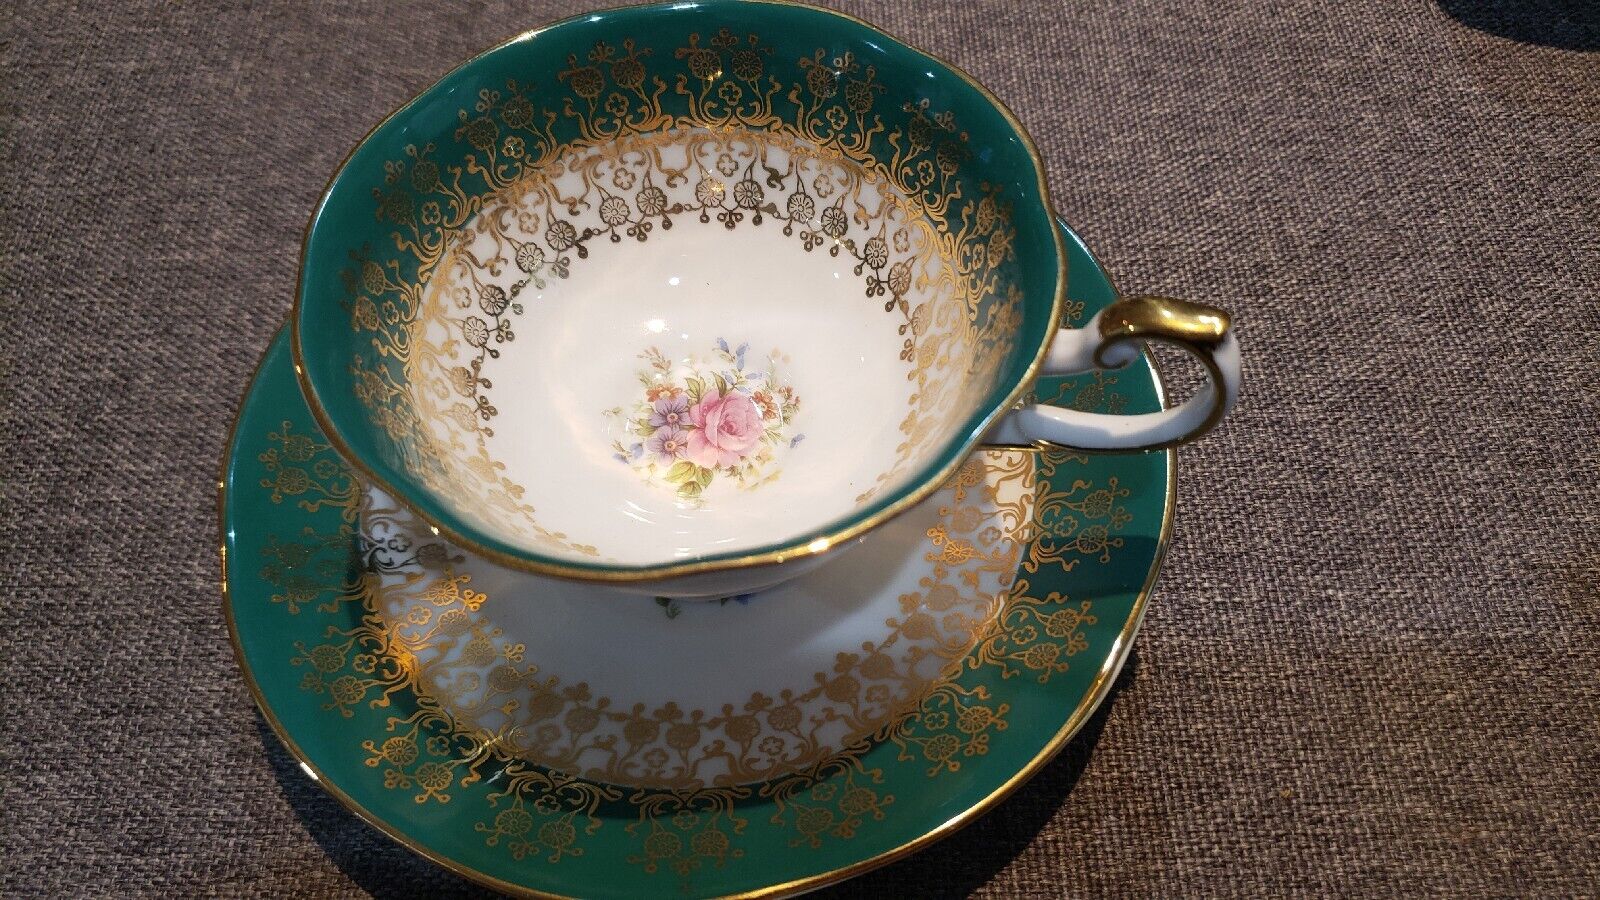 Vintage Queen\'s Mornarch in Green,Pink Rose in wild flowers gold filigree